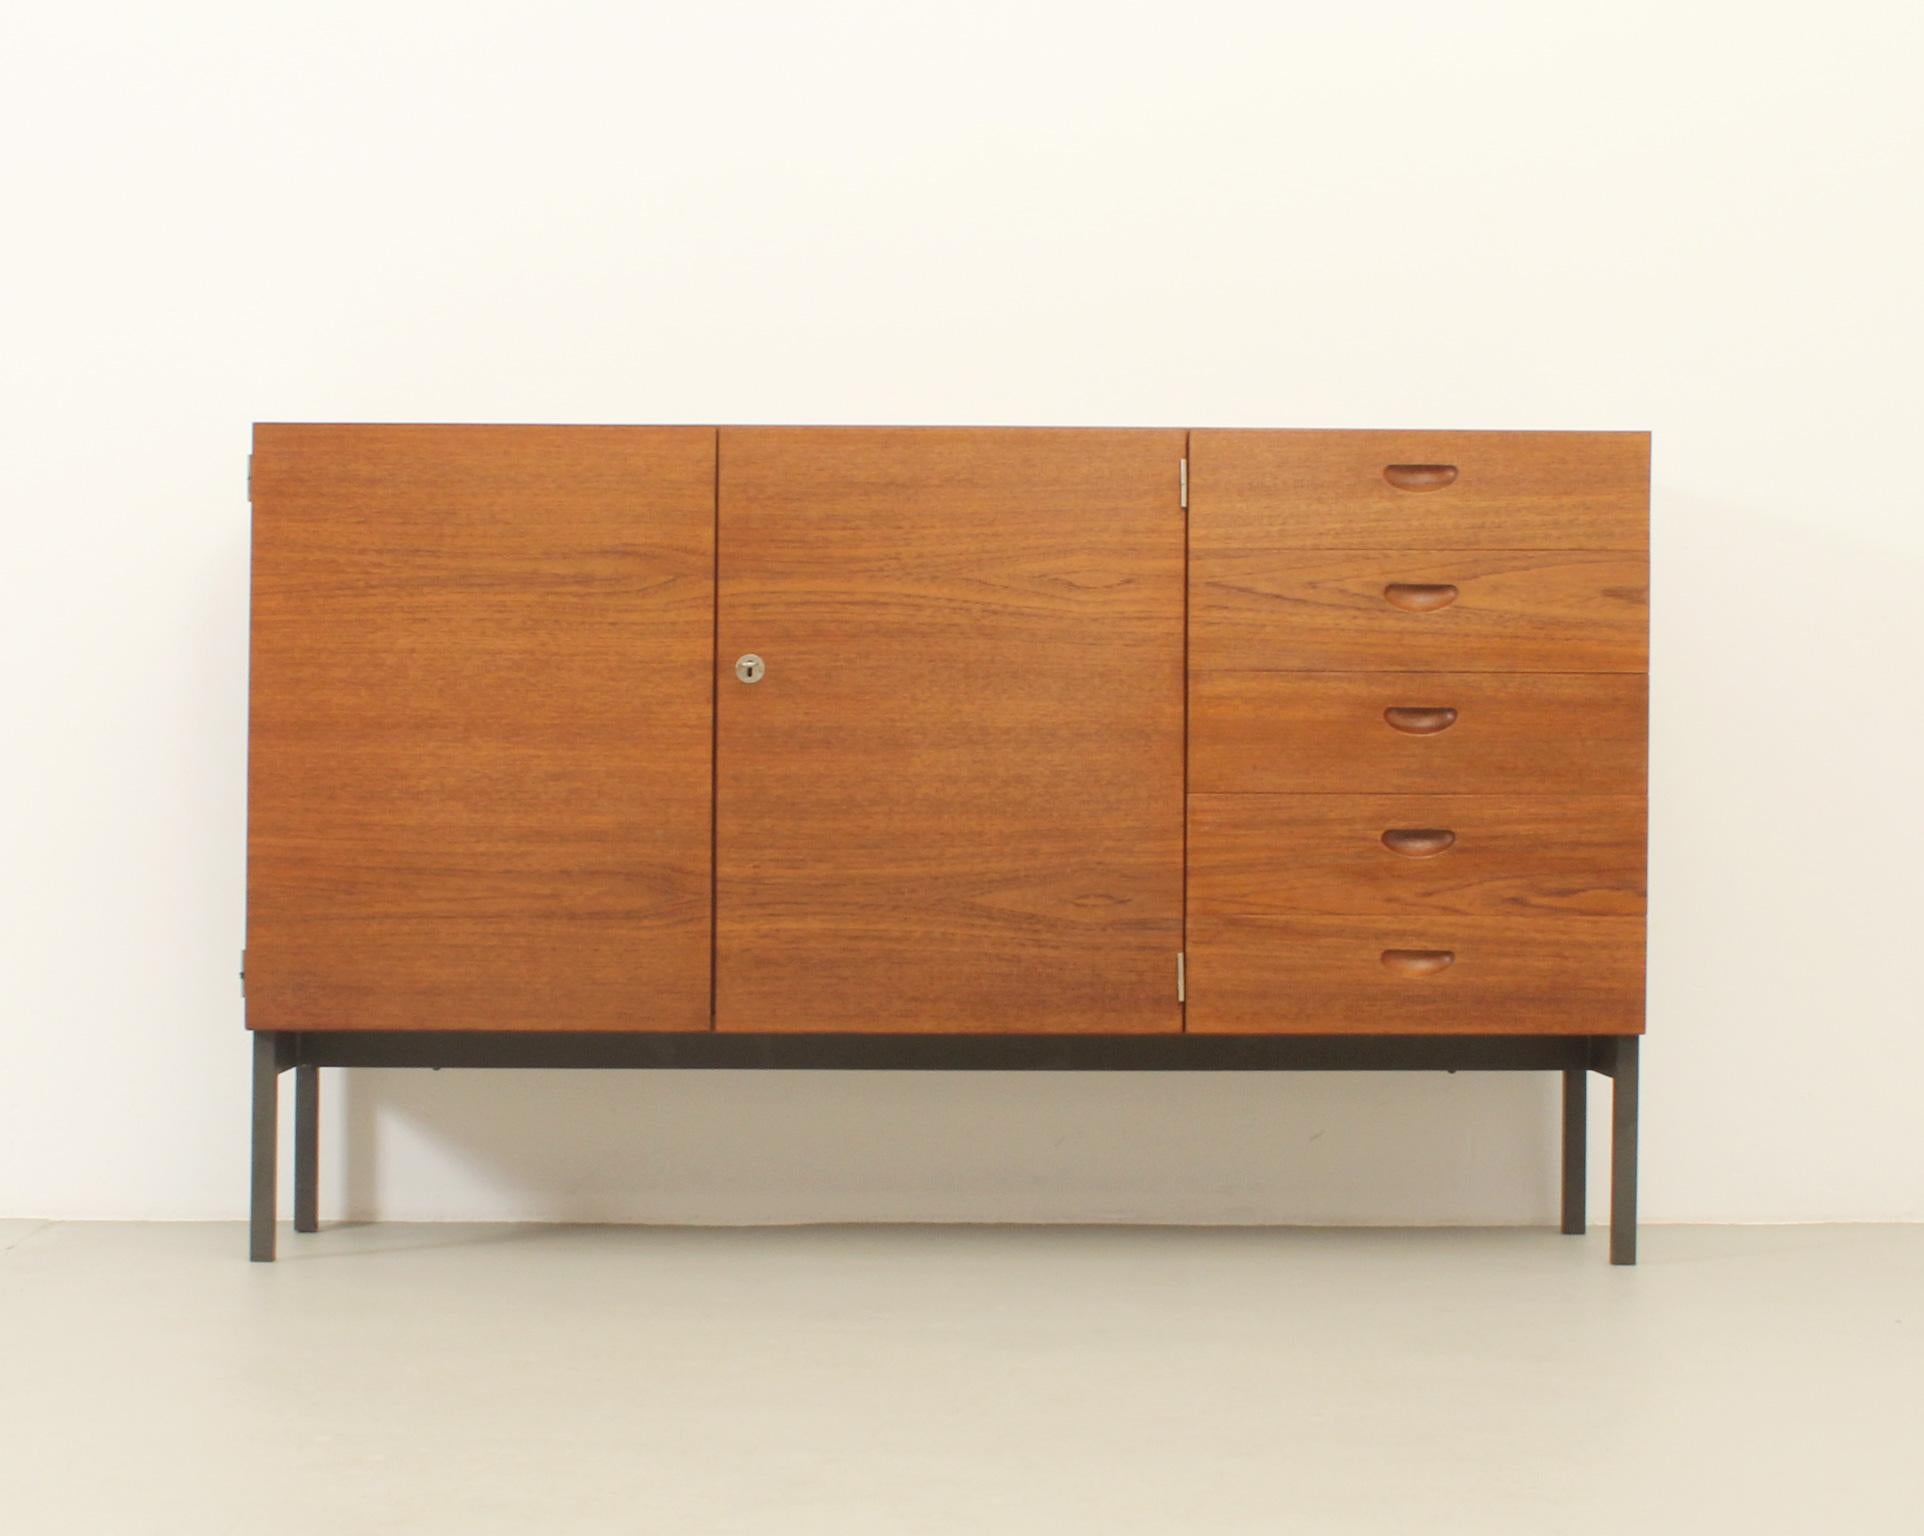 Sideboard designed in 1960s by Herbert Hirche for Christian Holzäpfel, Germany. Teak wood with maple wood interior and black metal base. Two doors with internal shelves and five drawers.